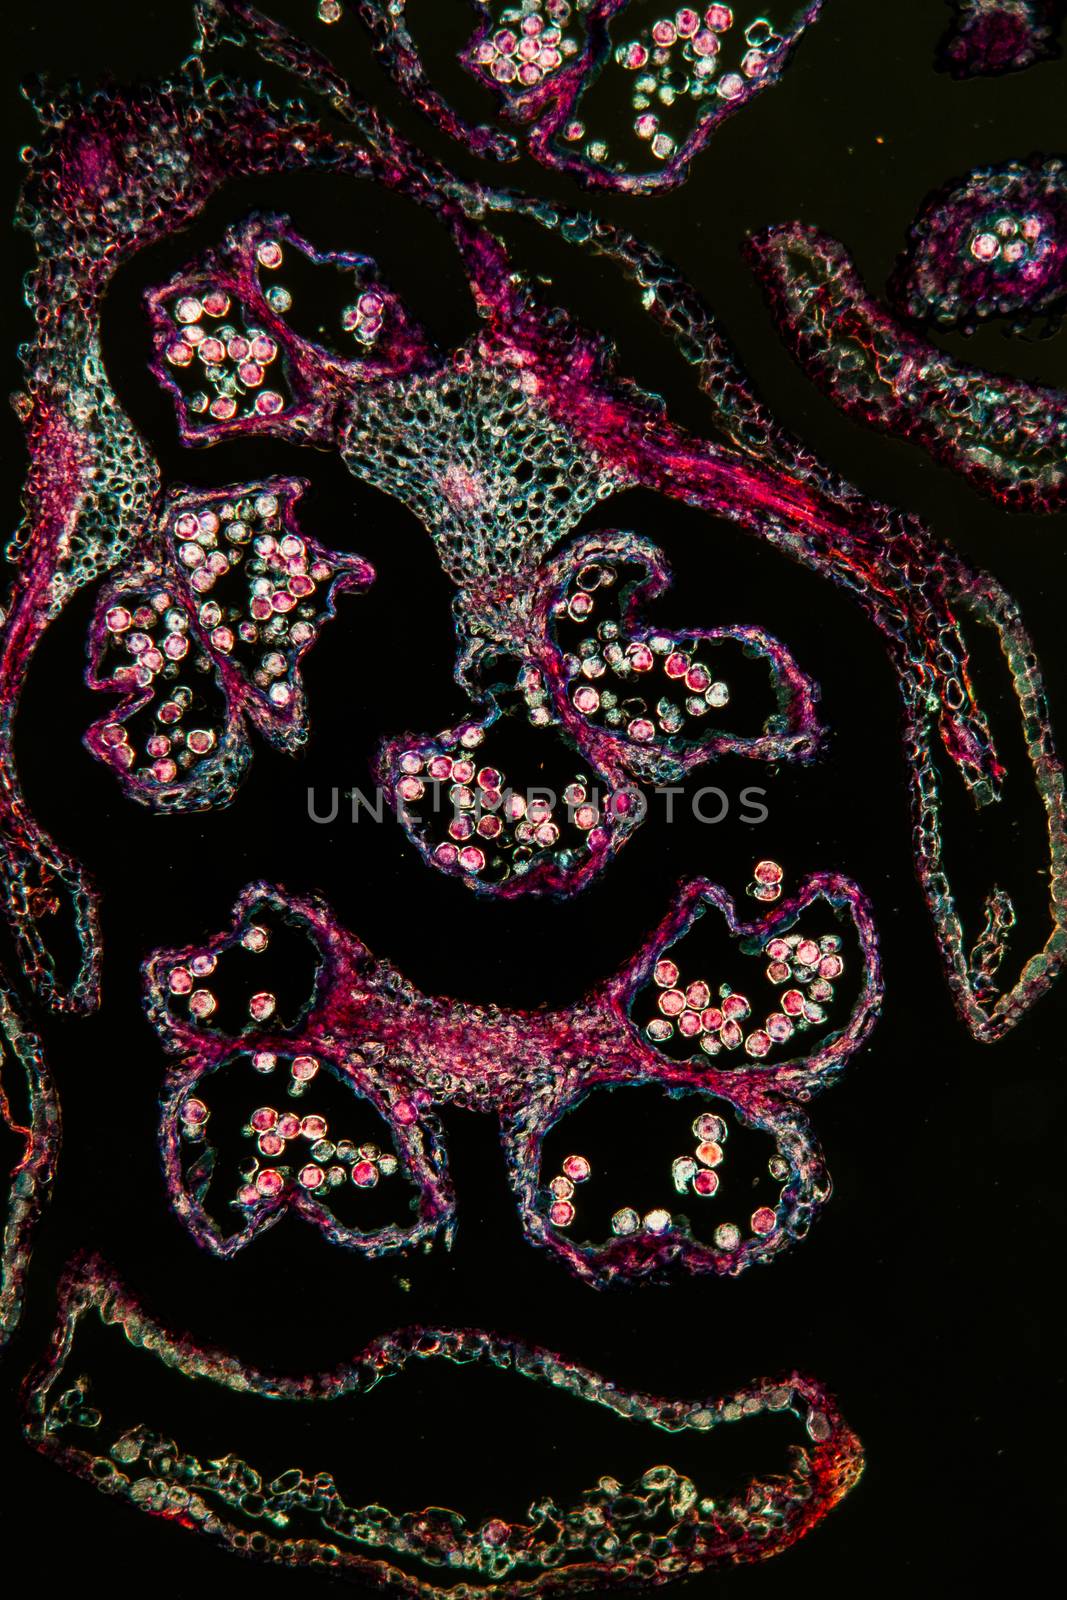 Alder cat fruit stand under the microscope 100x by Dr-Lange